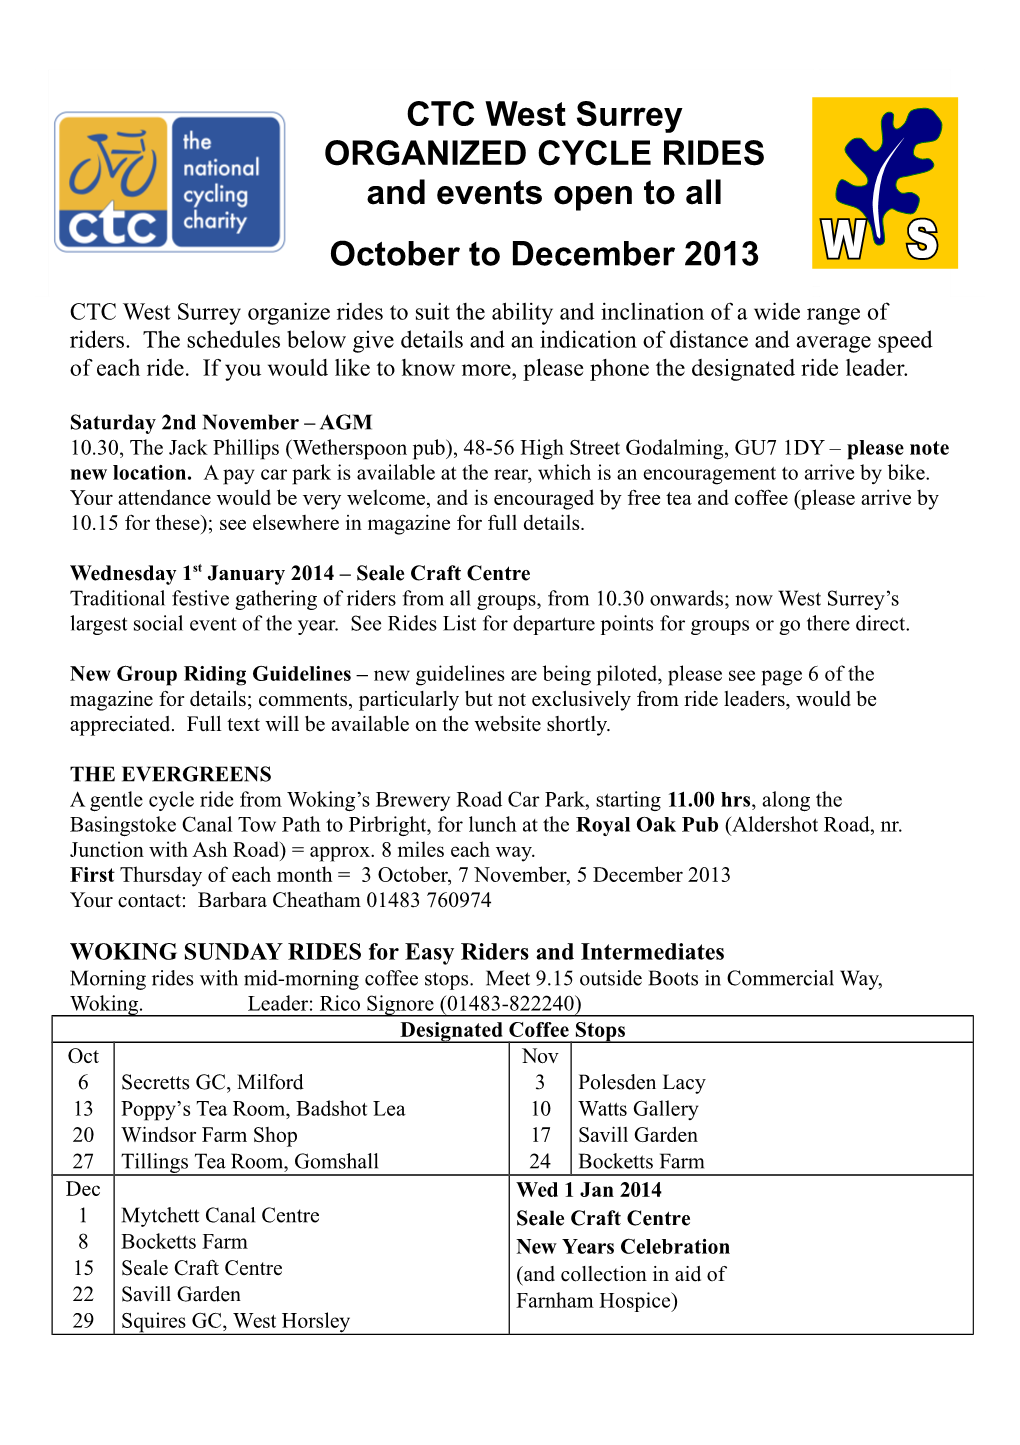 CTC West Surrey ORGANIZED CYCLE RIDES and Events Open to All October to December 2013